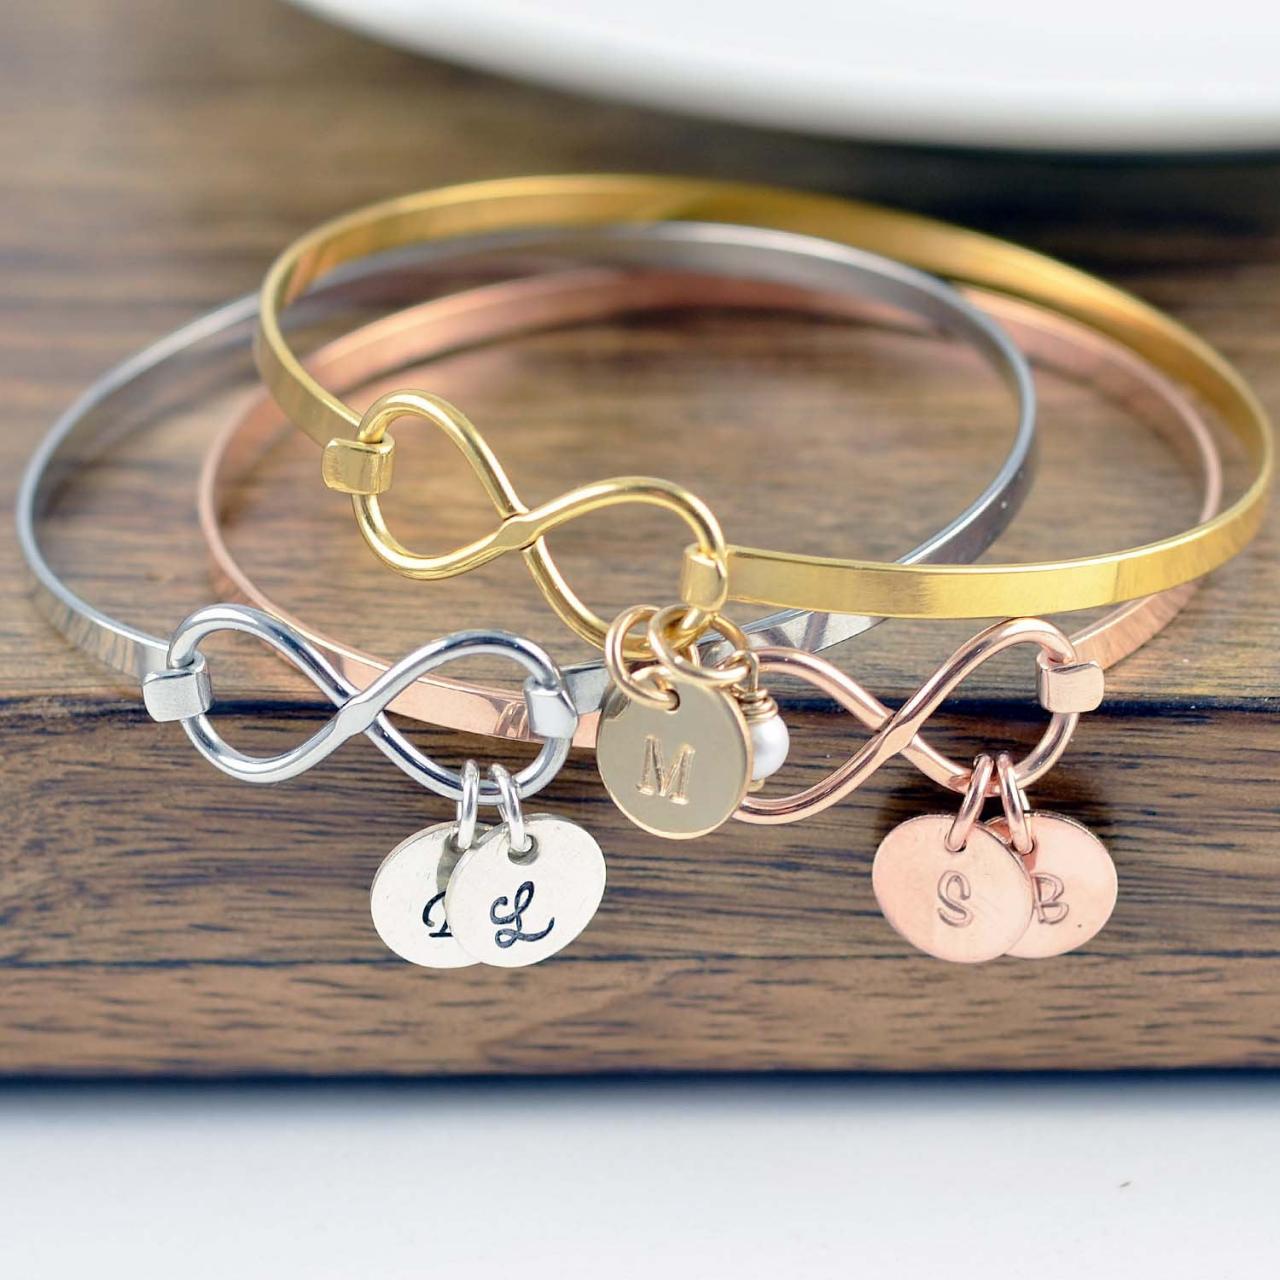 Personalized Mothers Day Bracelet, Infinity Bangle Bracelet, Mother's Day Gift Personalized Infinity Jewelry Personalized Gift Handmade